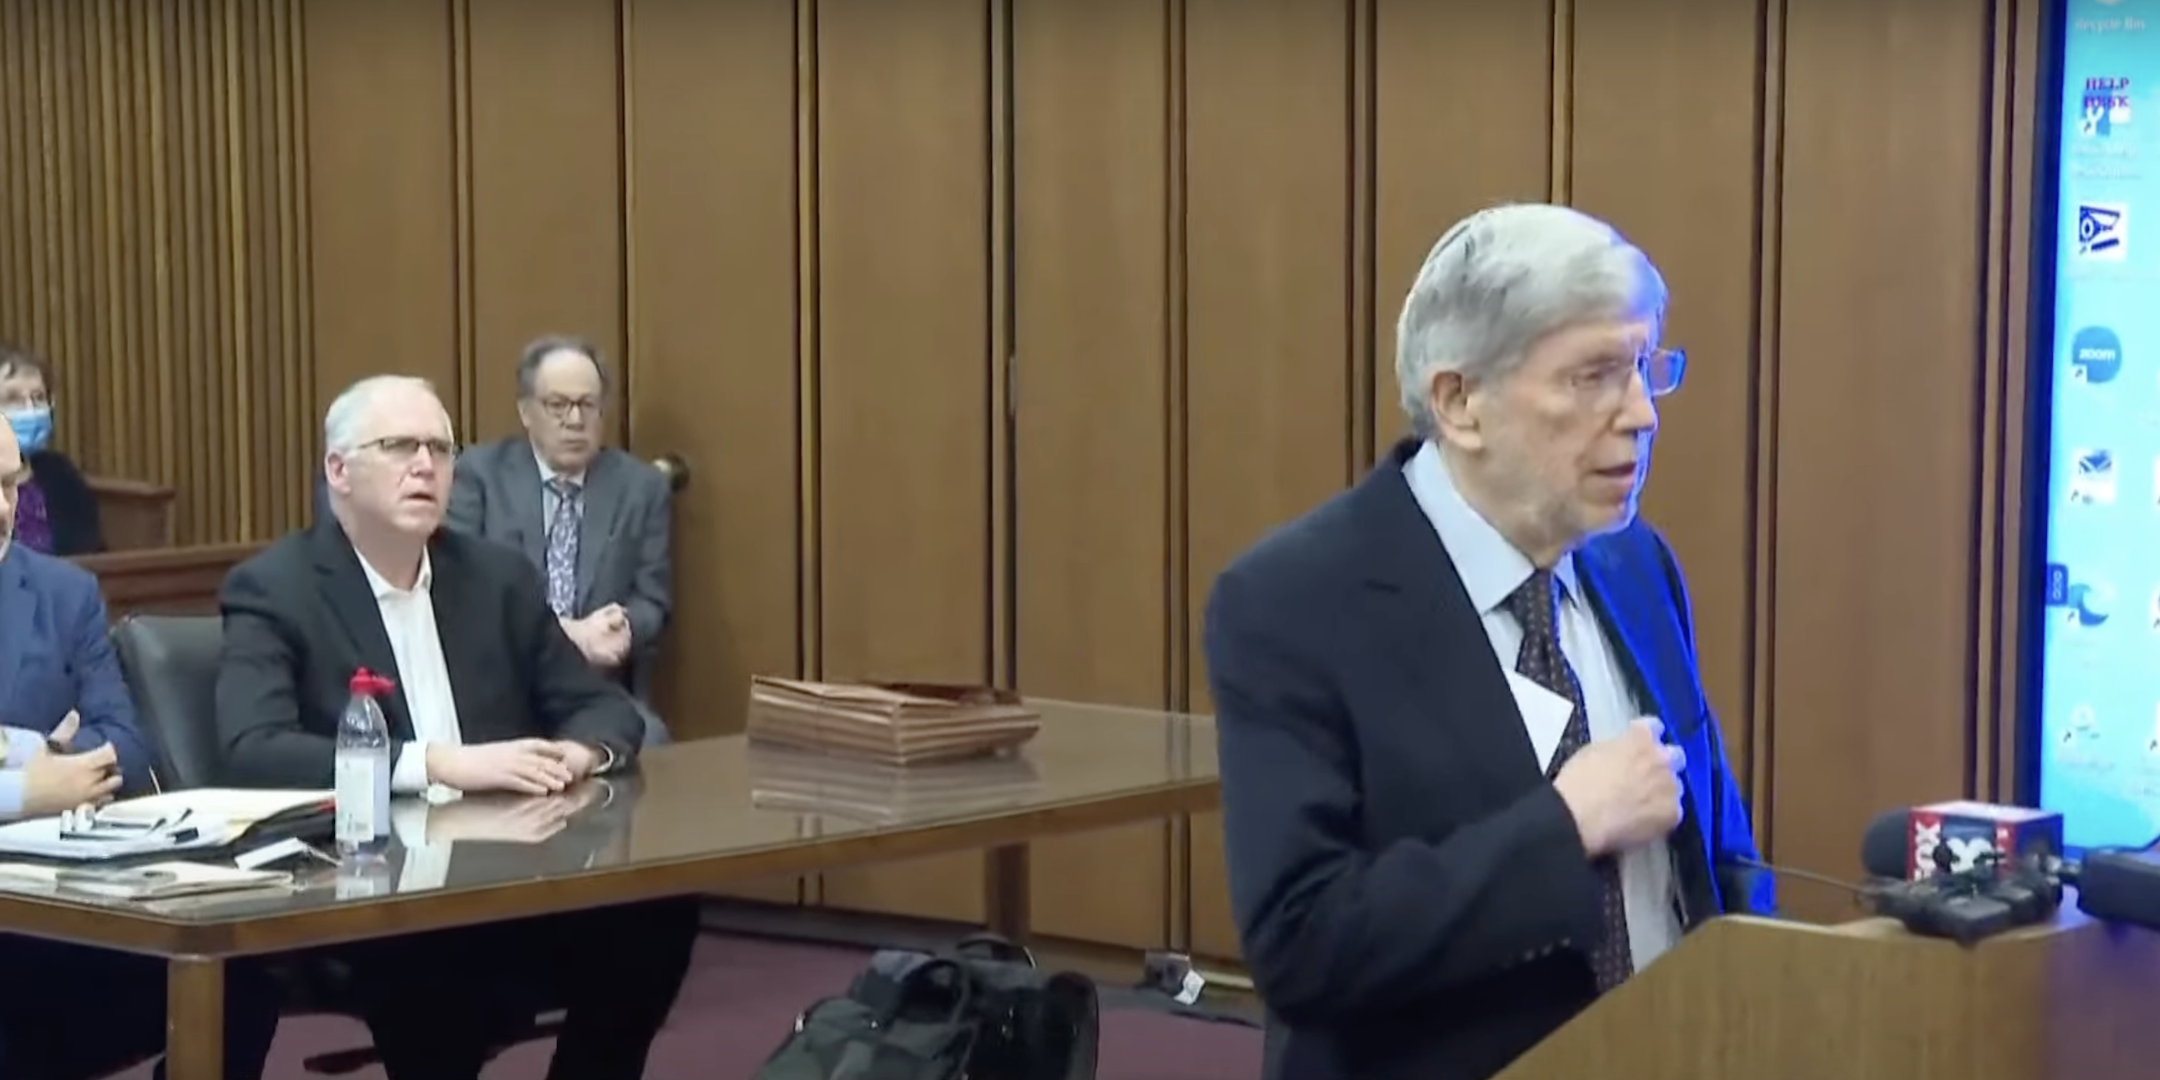 Rabbi William Lebeau (right) provides a character witness testimony on behalf of Rabbi Stephen Weiss (left) at Weiss’ sentencing hearing for crimes of soliciting underage sex, Cleveland, Ohio, Feb. 27, 2023. Weiss was sentenced to six months in prison. (Screenshot)